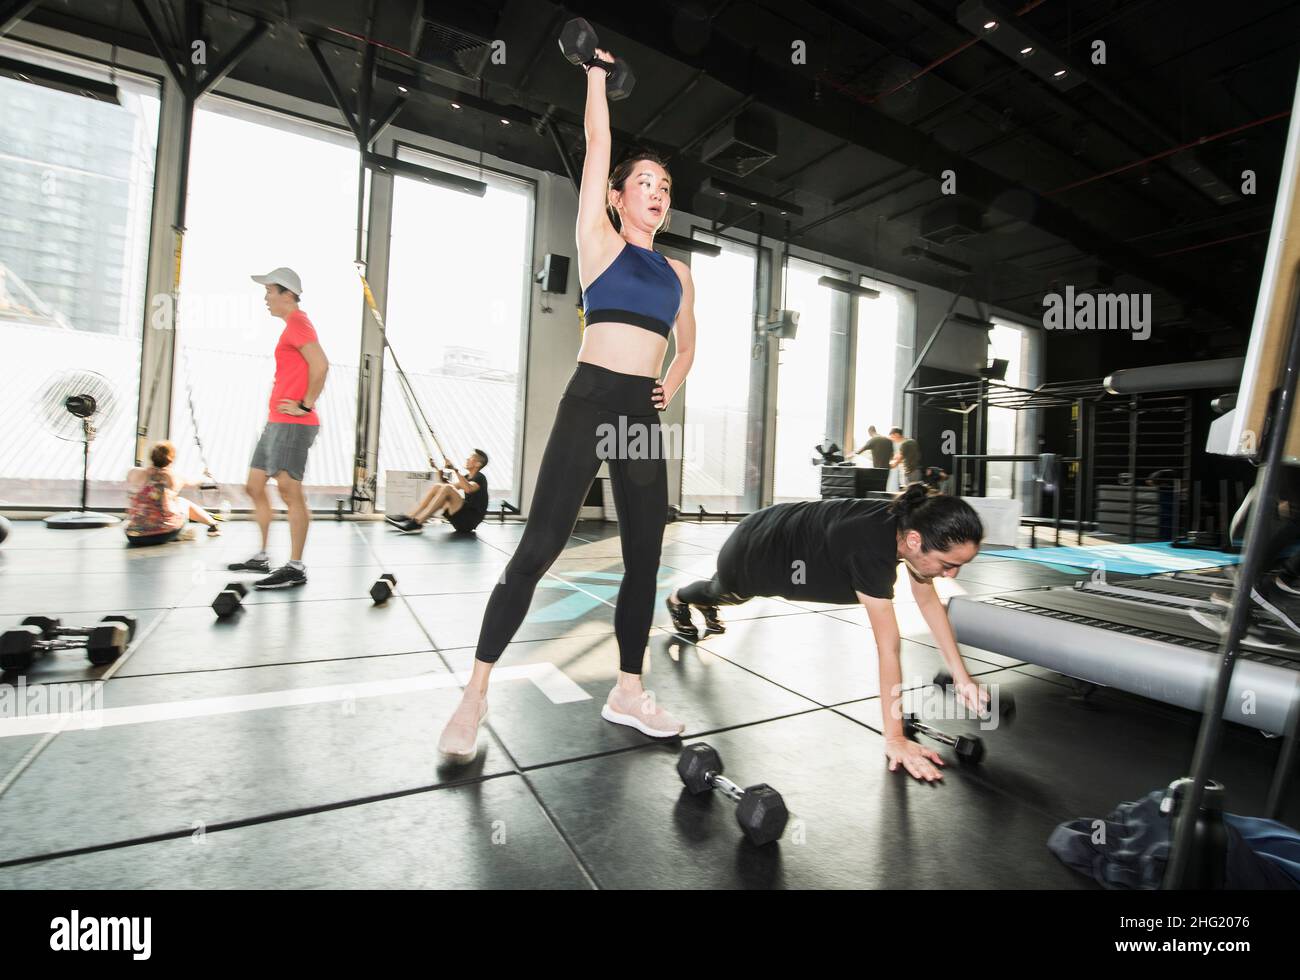 people working out during group fitness training at gym in Bangkok Stock Photo